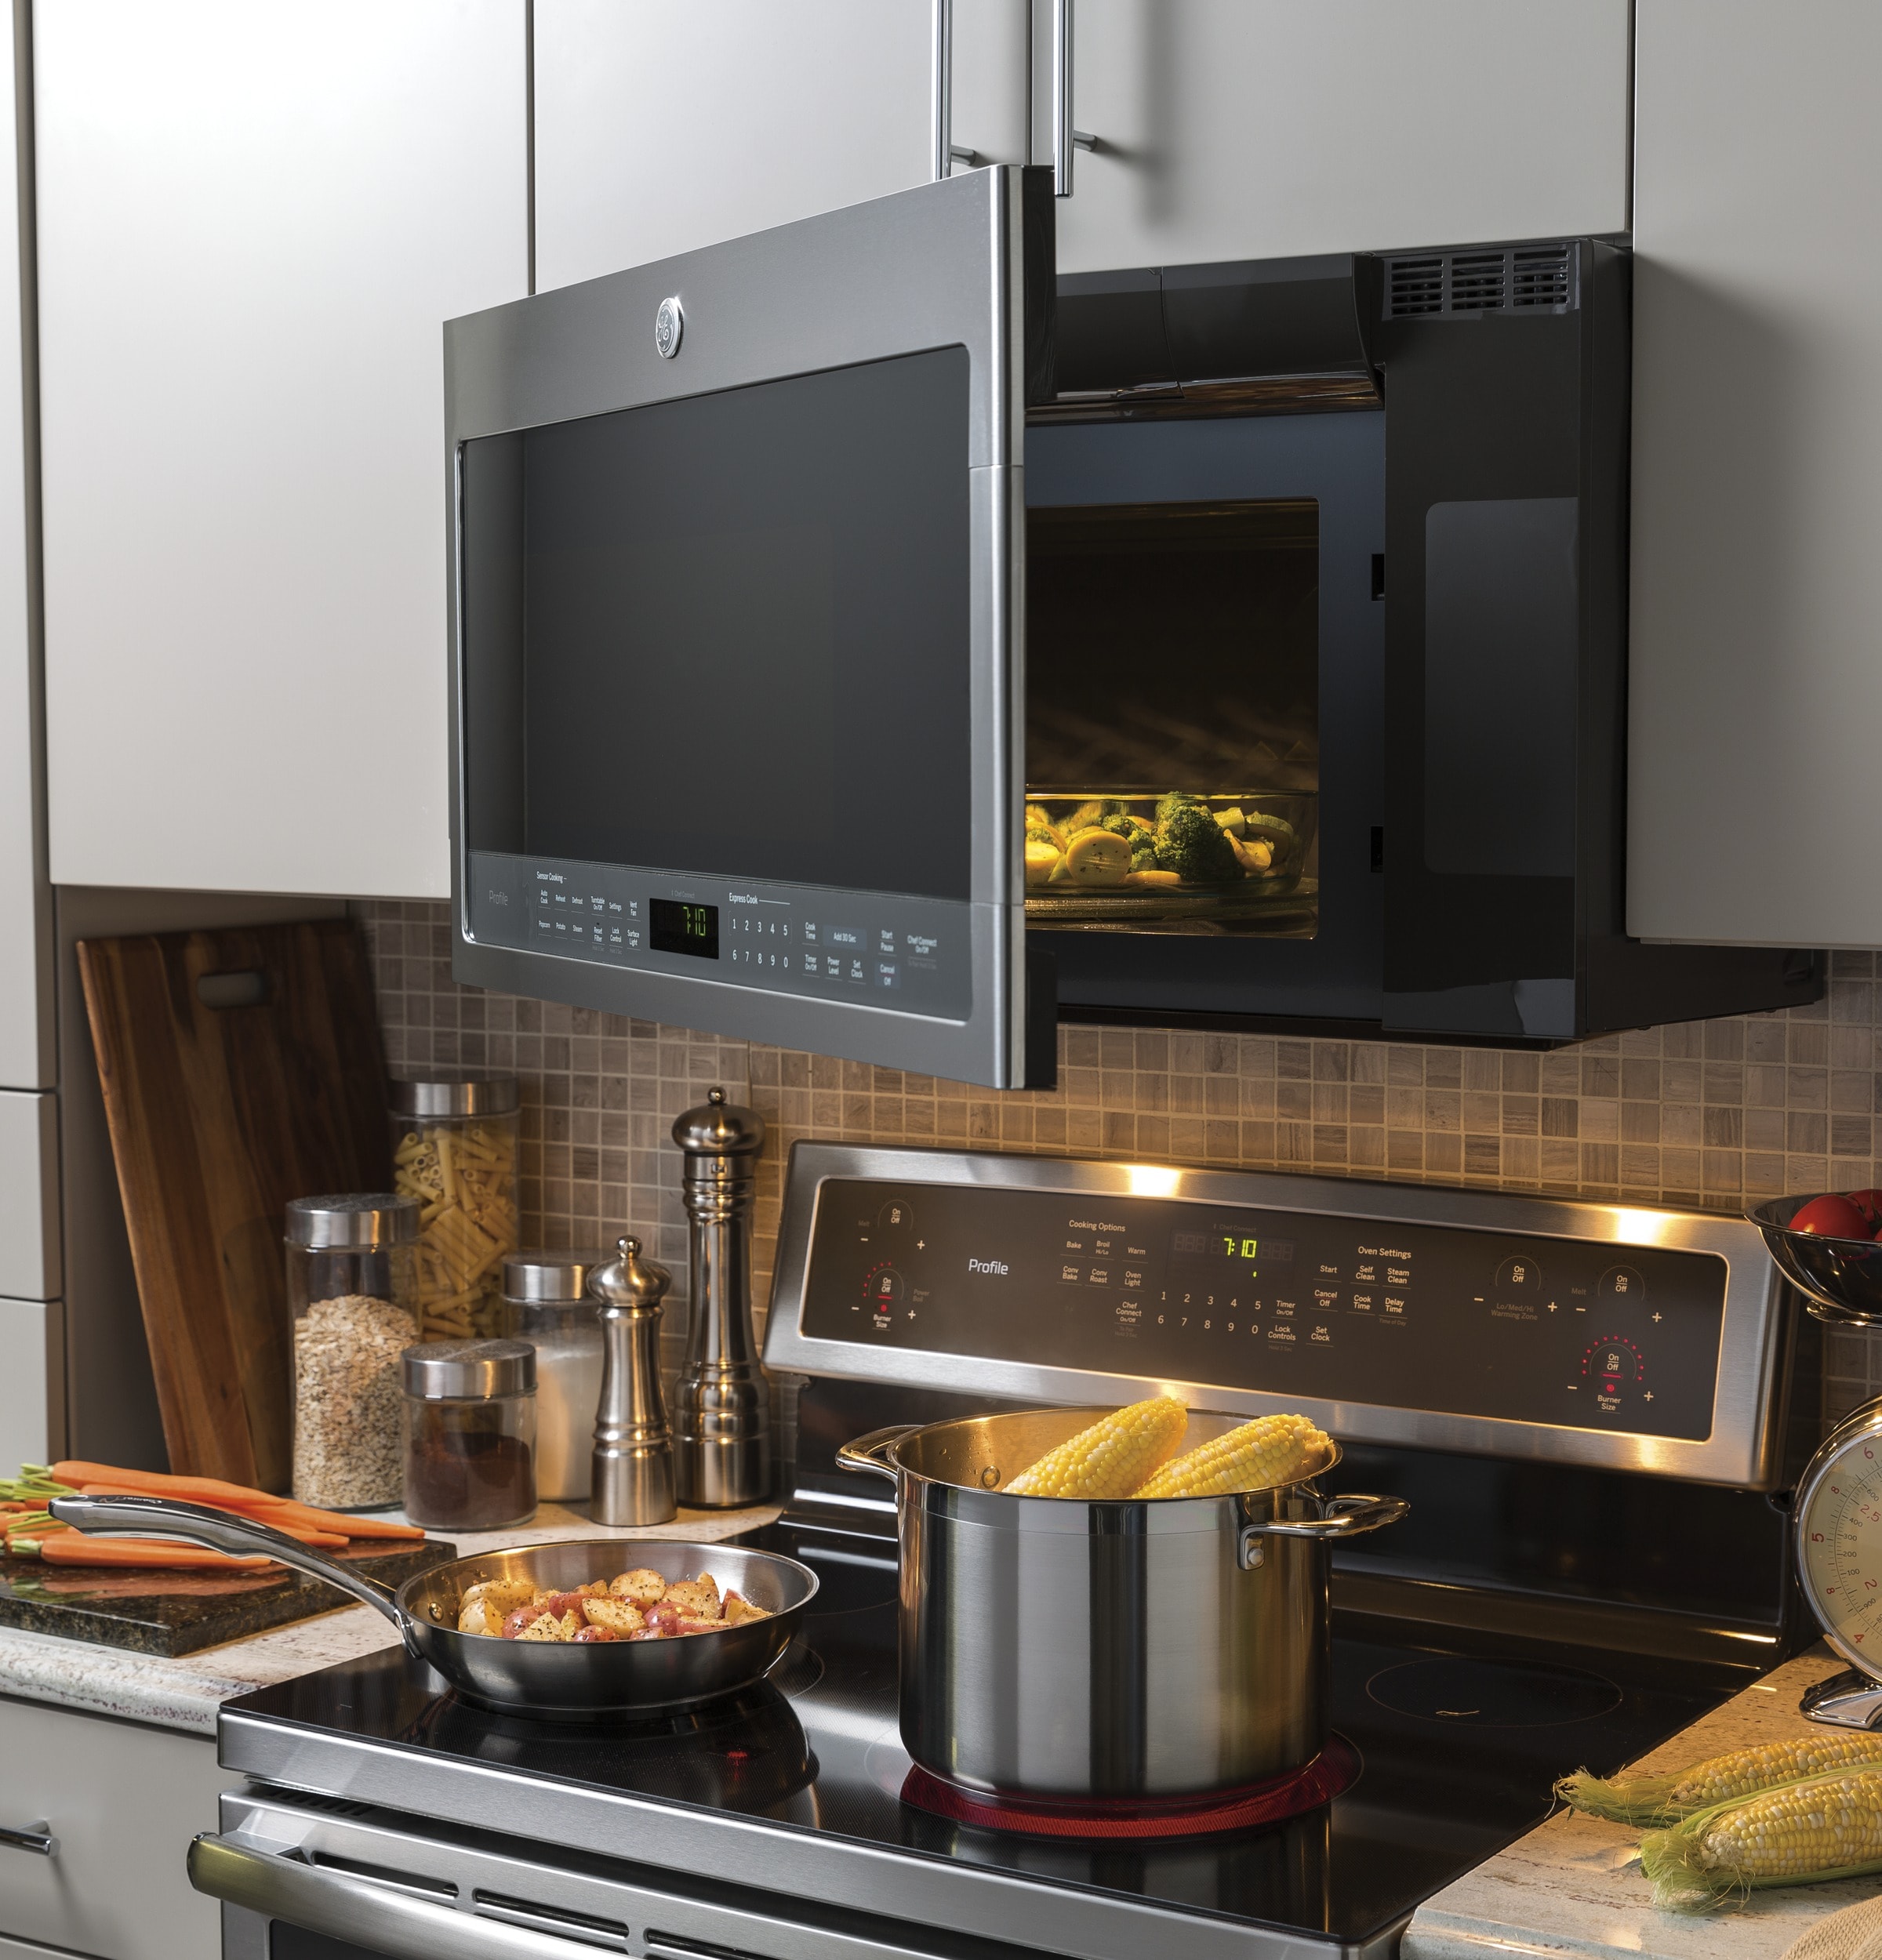 GE® 1.6 Cu. Ft. Over-the-Range Microwave Oven